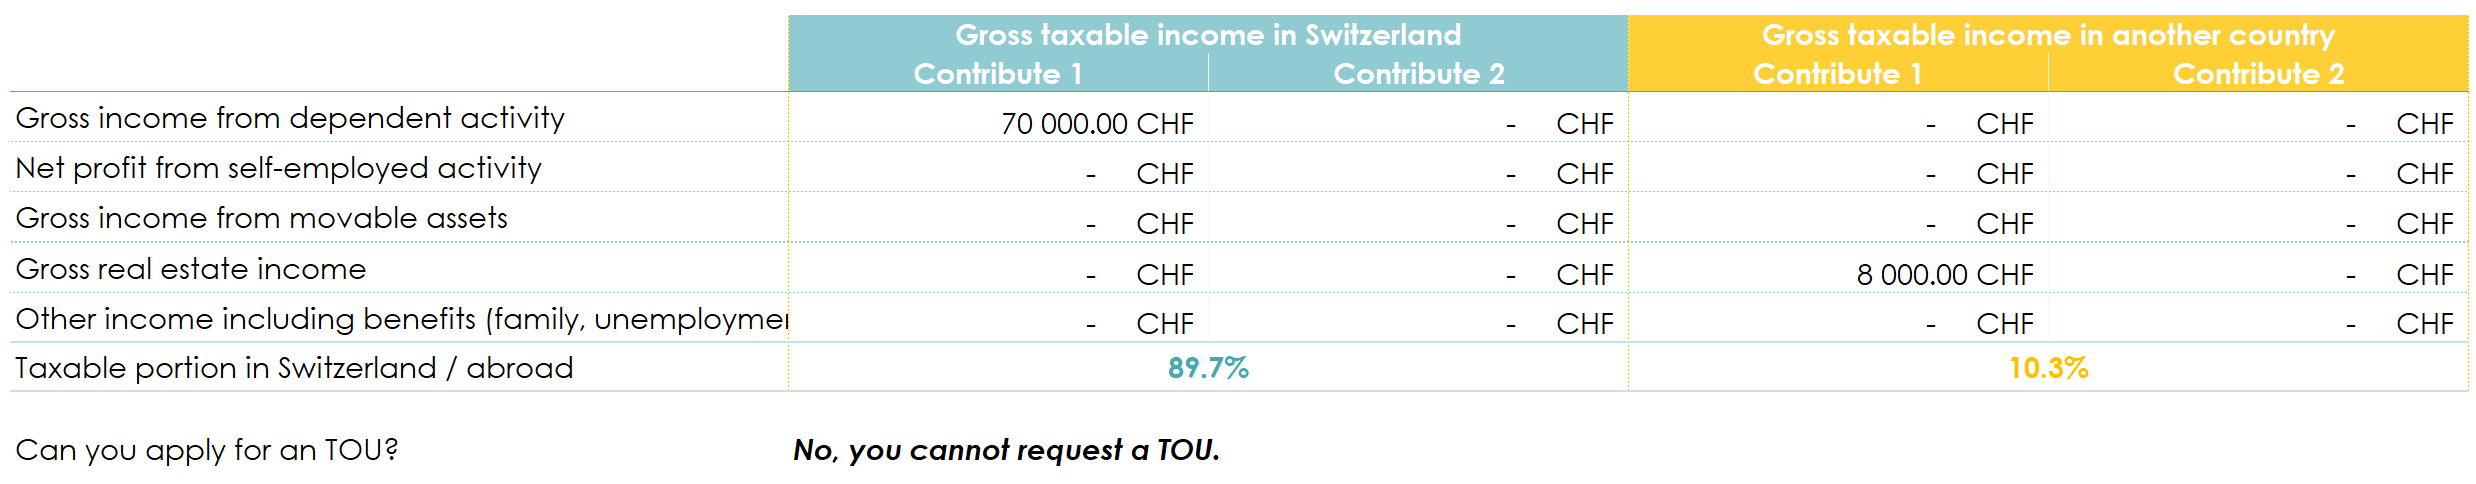 Table showing the distribution of the taxable portion of gross income between Switzerland and abroad when owning real estate abroad